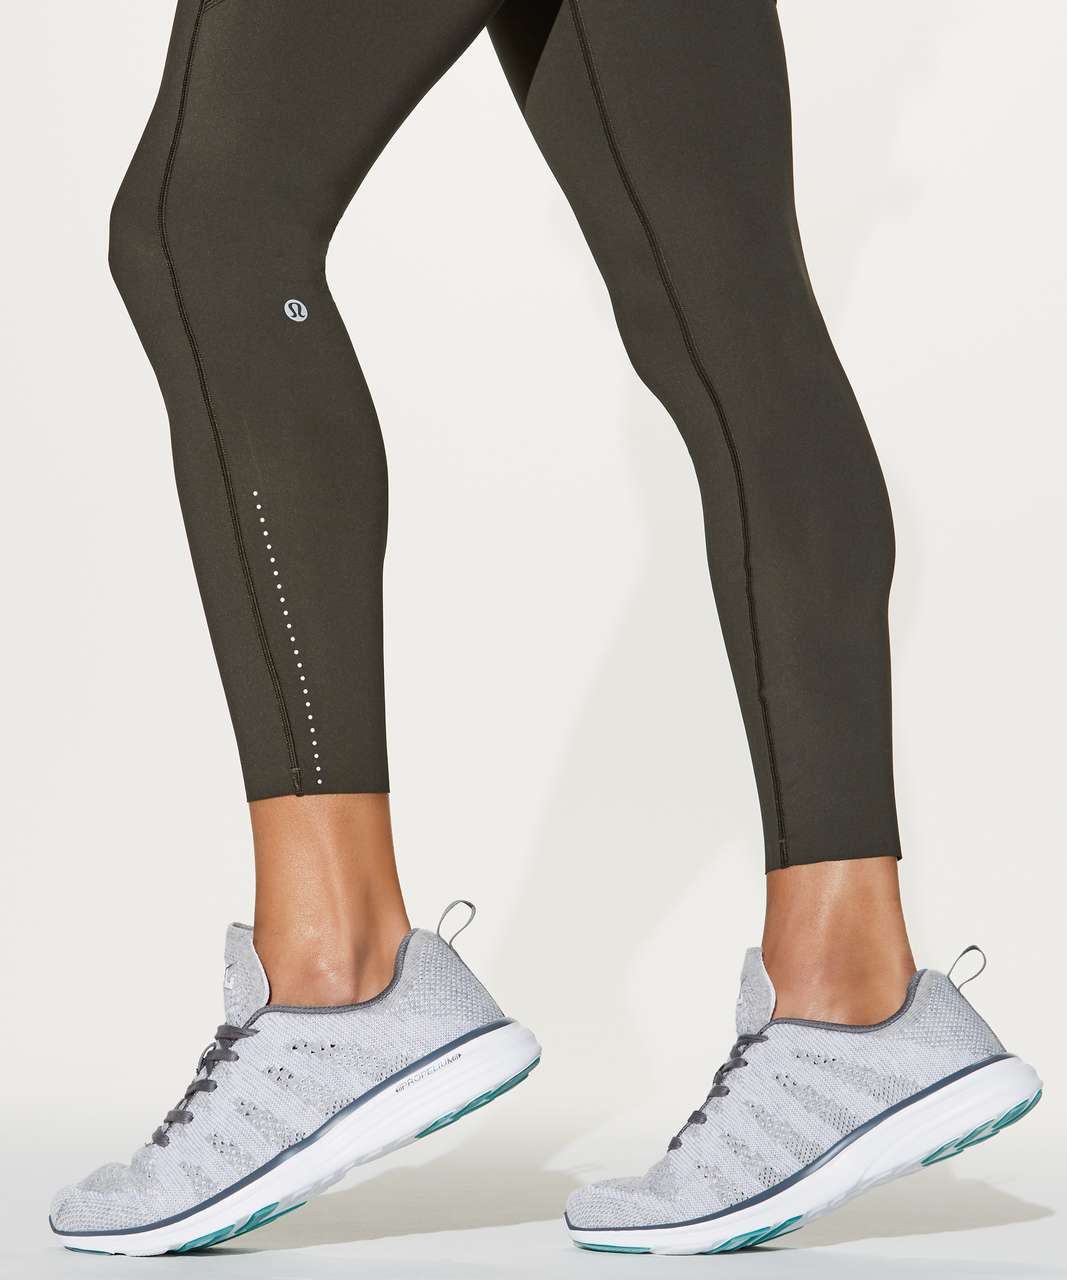 Lululemon Fast & Free 7/8 Tight II *Nulux 25" - Dark Olive (First Release)